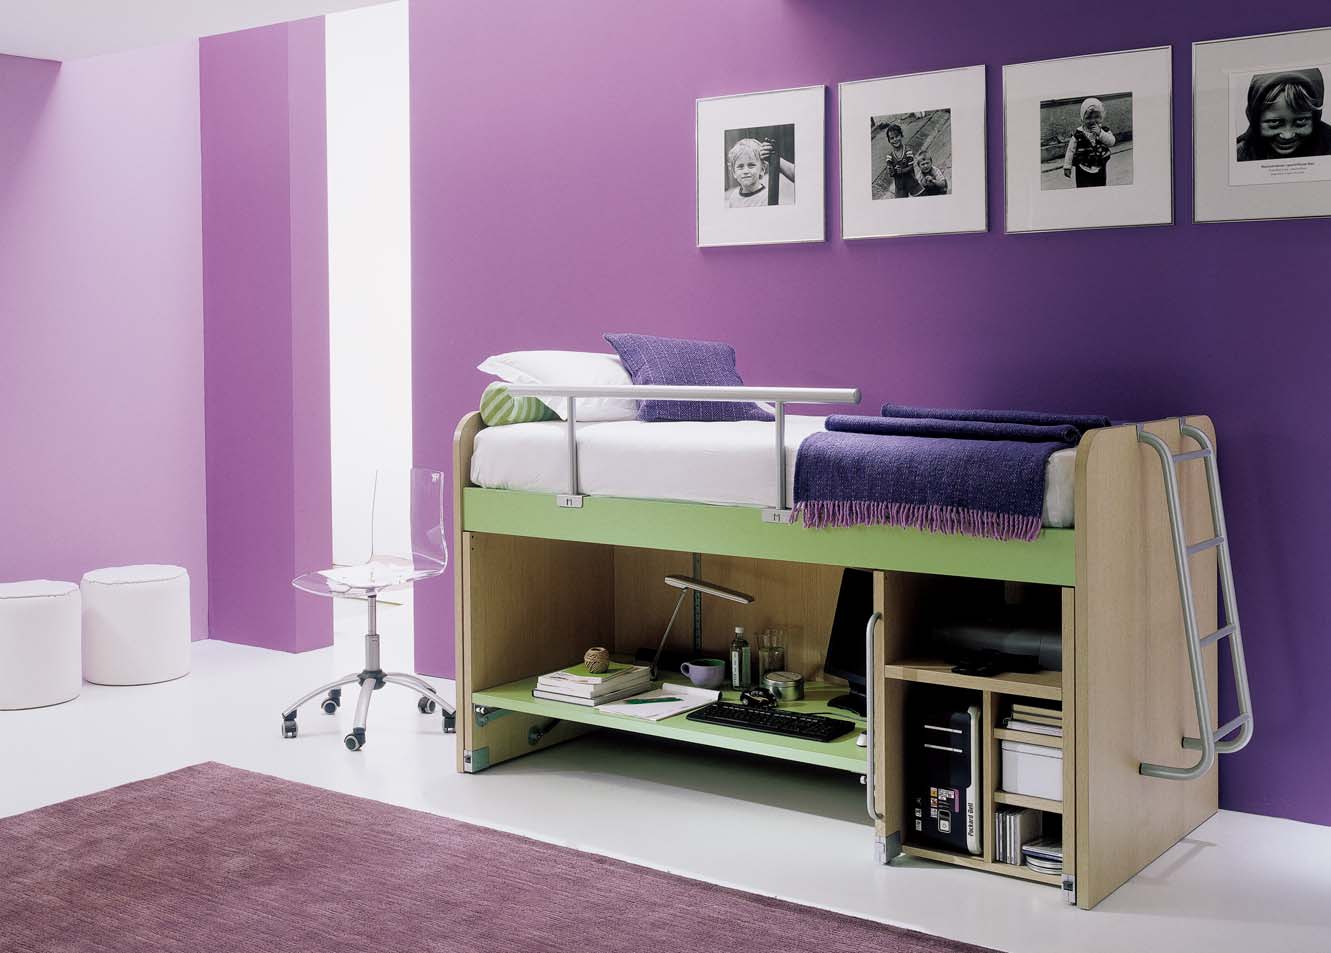 Room Paint With Boys Room Paint Ideas Decorated With Purple Wall Color Completed With Modern Bedroom Furniture And White Flooring Ideas Kids Room Boys Room Paint Ideas For Adventurous Imagination